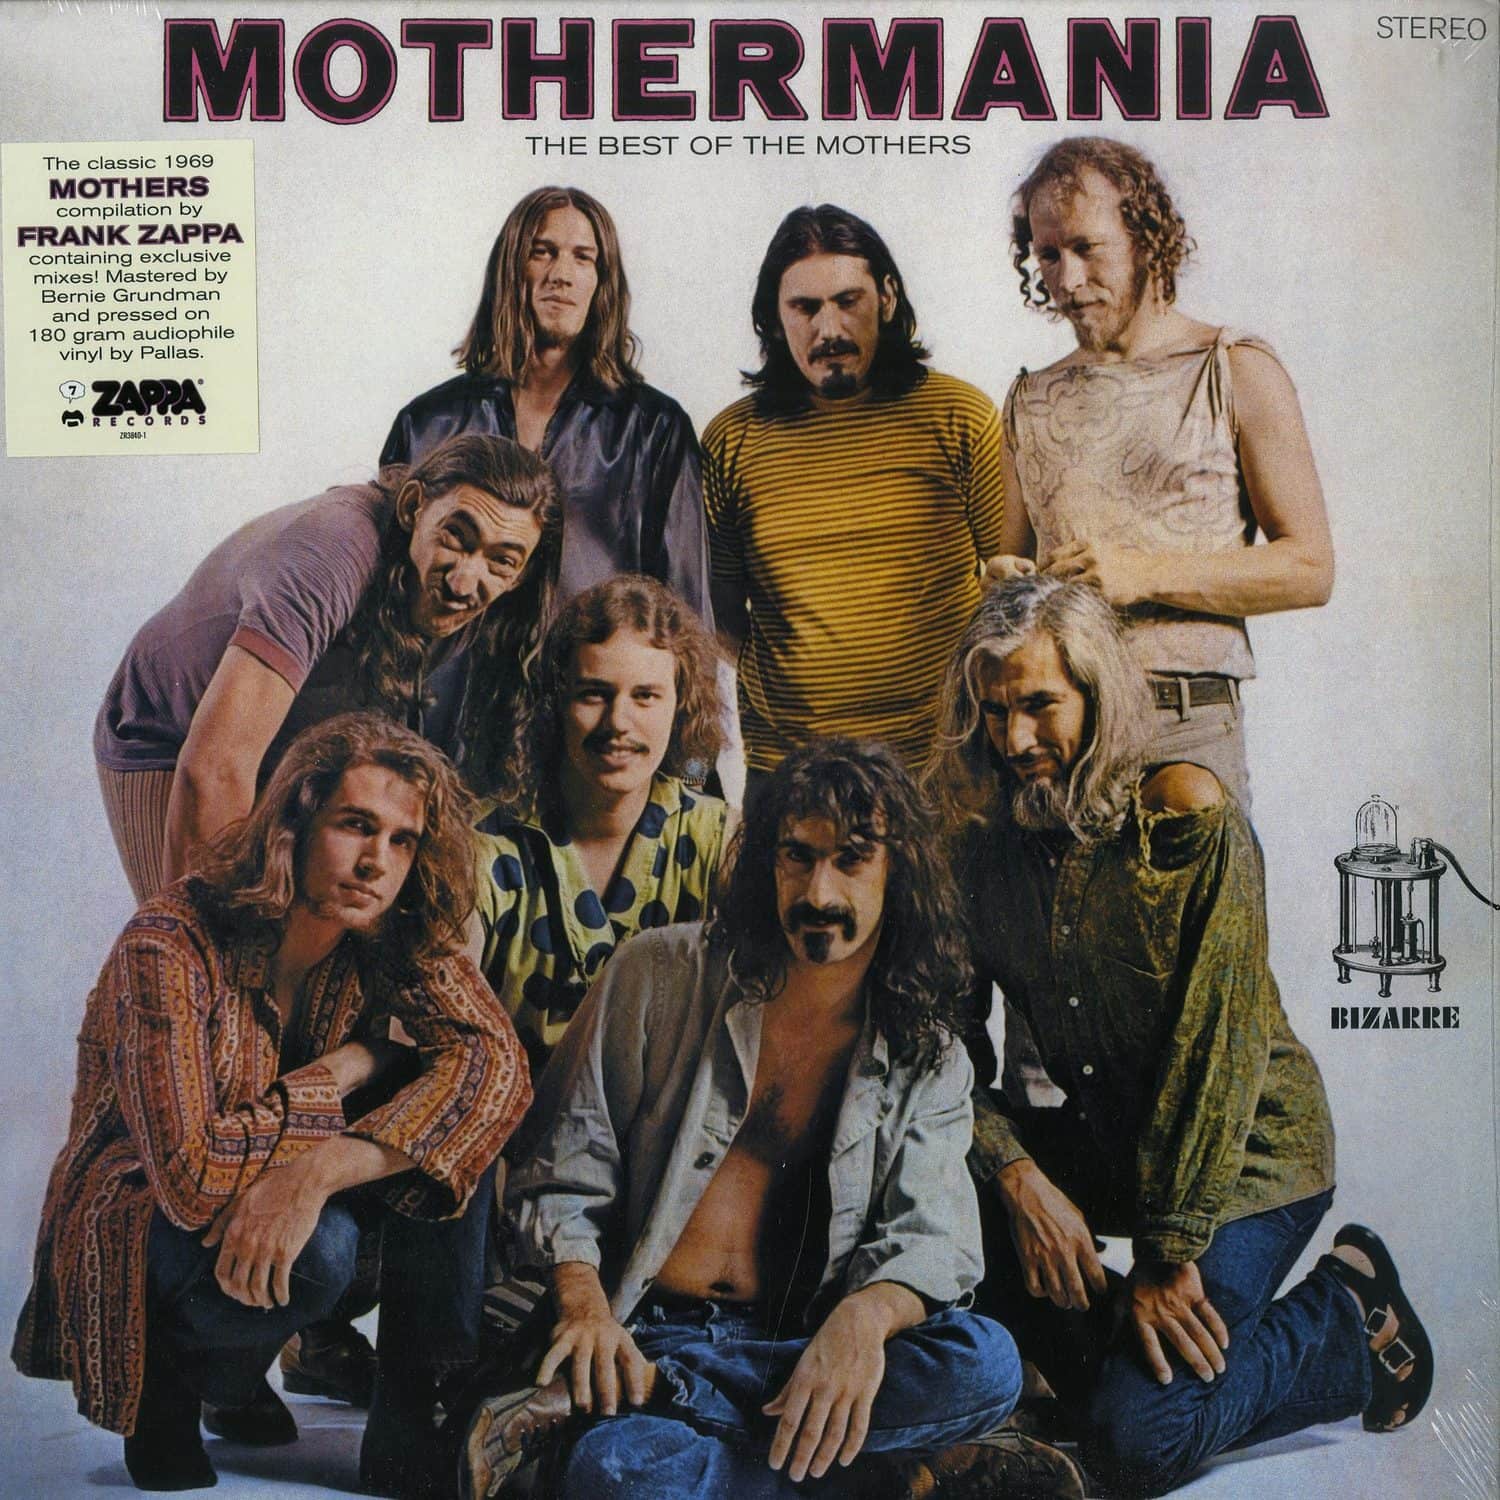 Frank Zappa & The Mothers Of Invention - MOTHERMANIA: THE BEST OF THE MOTHERS 